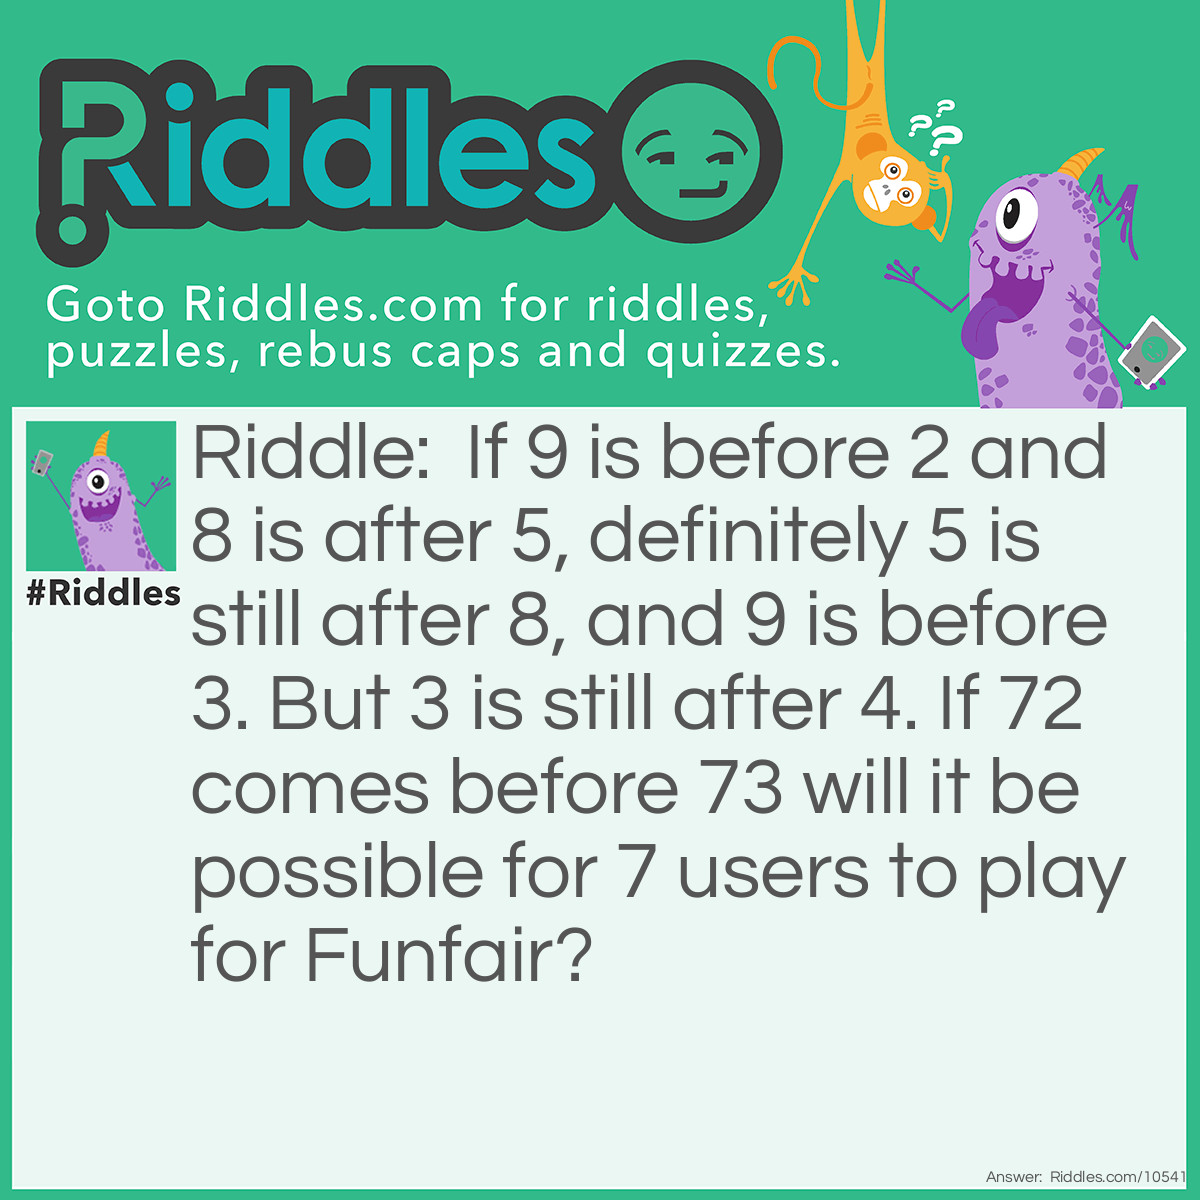 Riddle: If 9 is before 2 and 8 is after 5, definitely 5 is still after 8, and 9 is before 3. But 3 is still after 4. If 72 comes before 73 will it be possible for 7 users to play for Funfair? Answer: ???